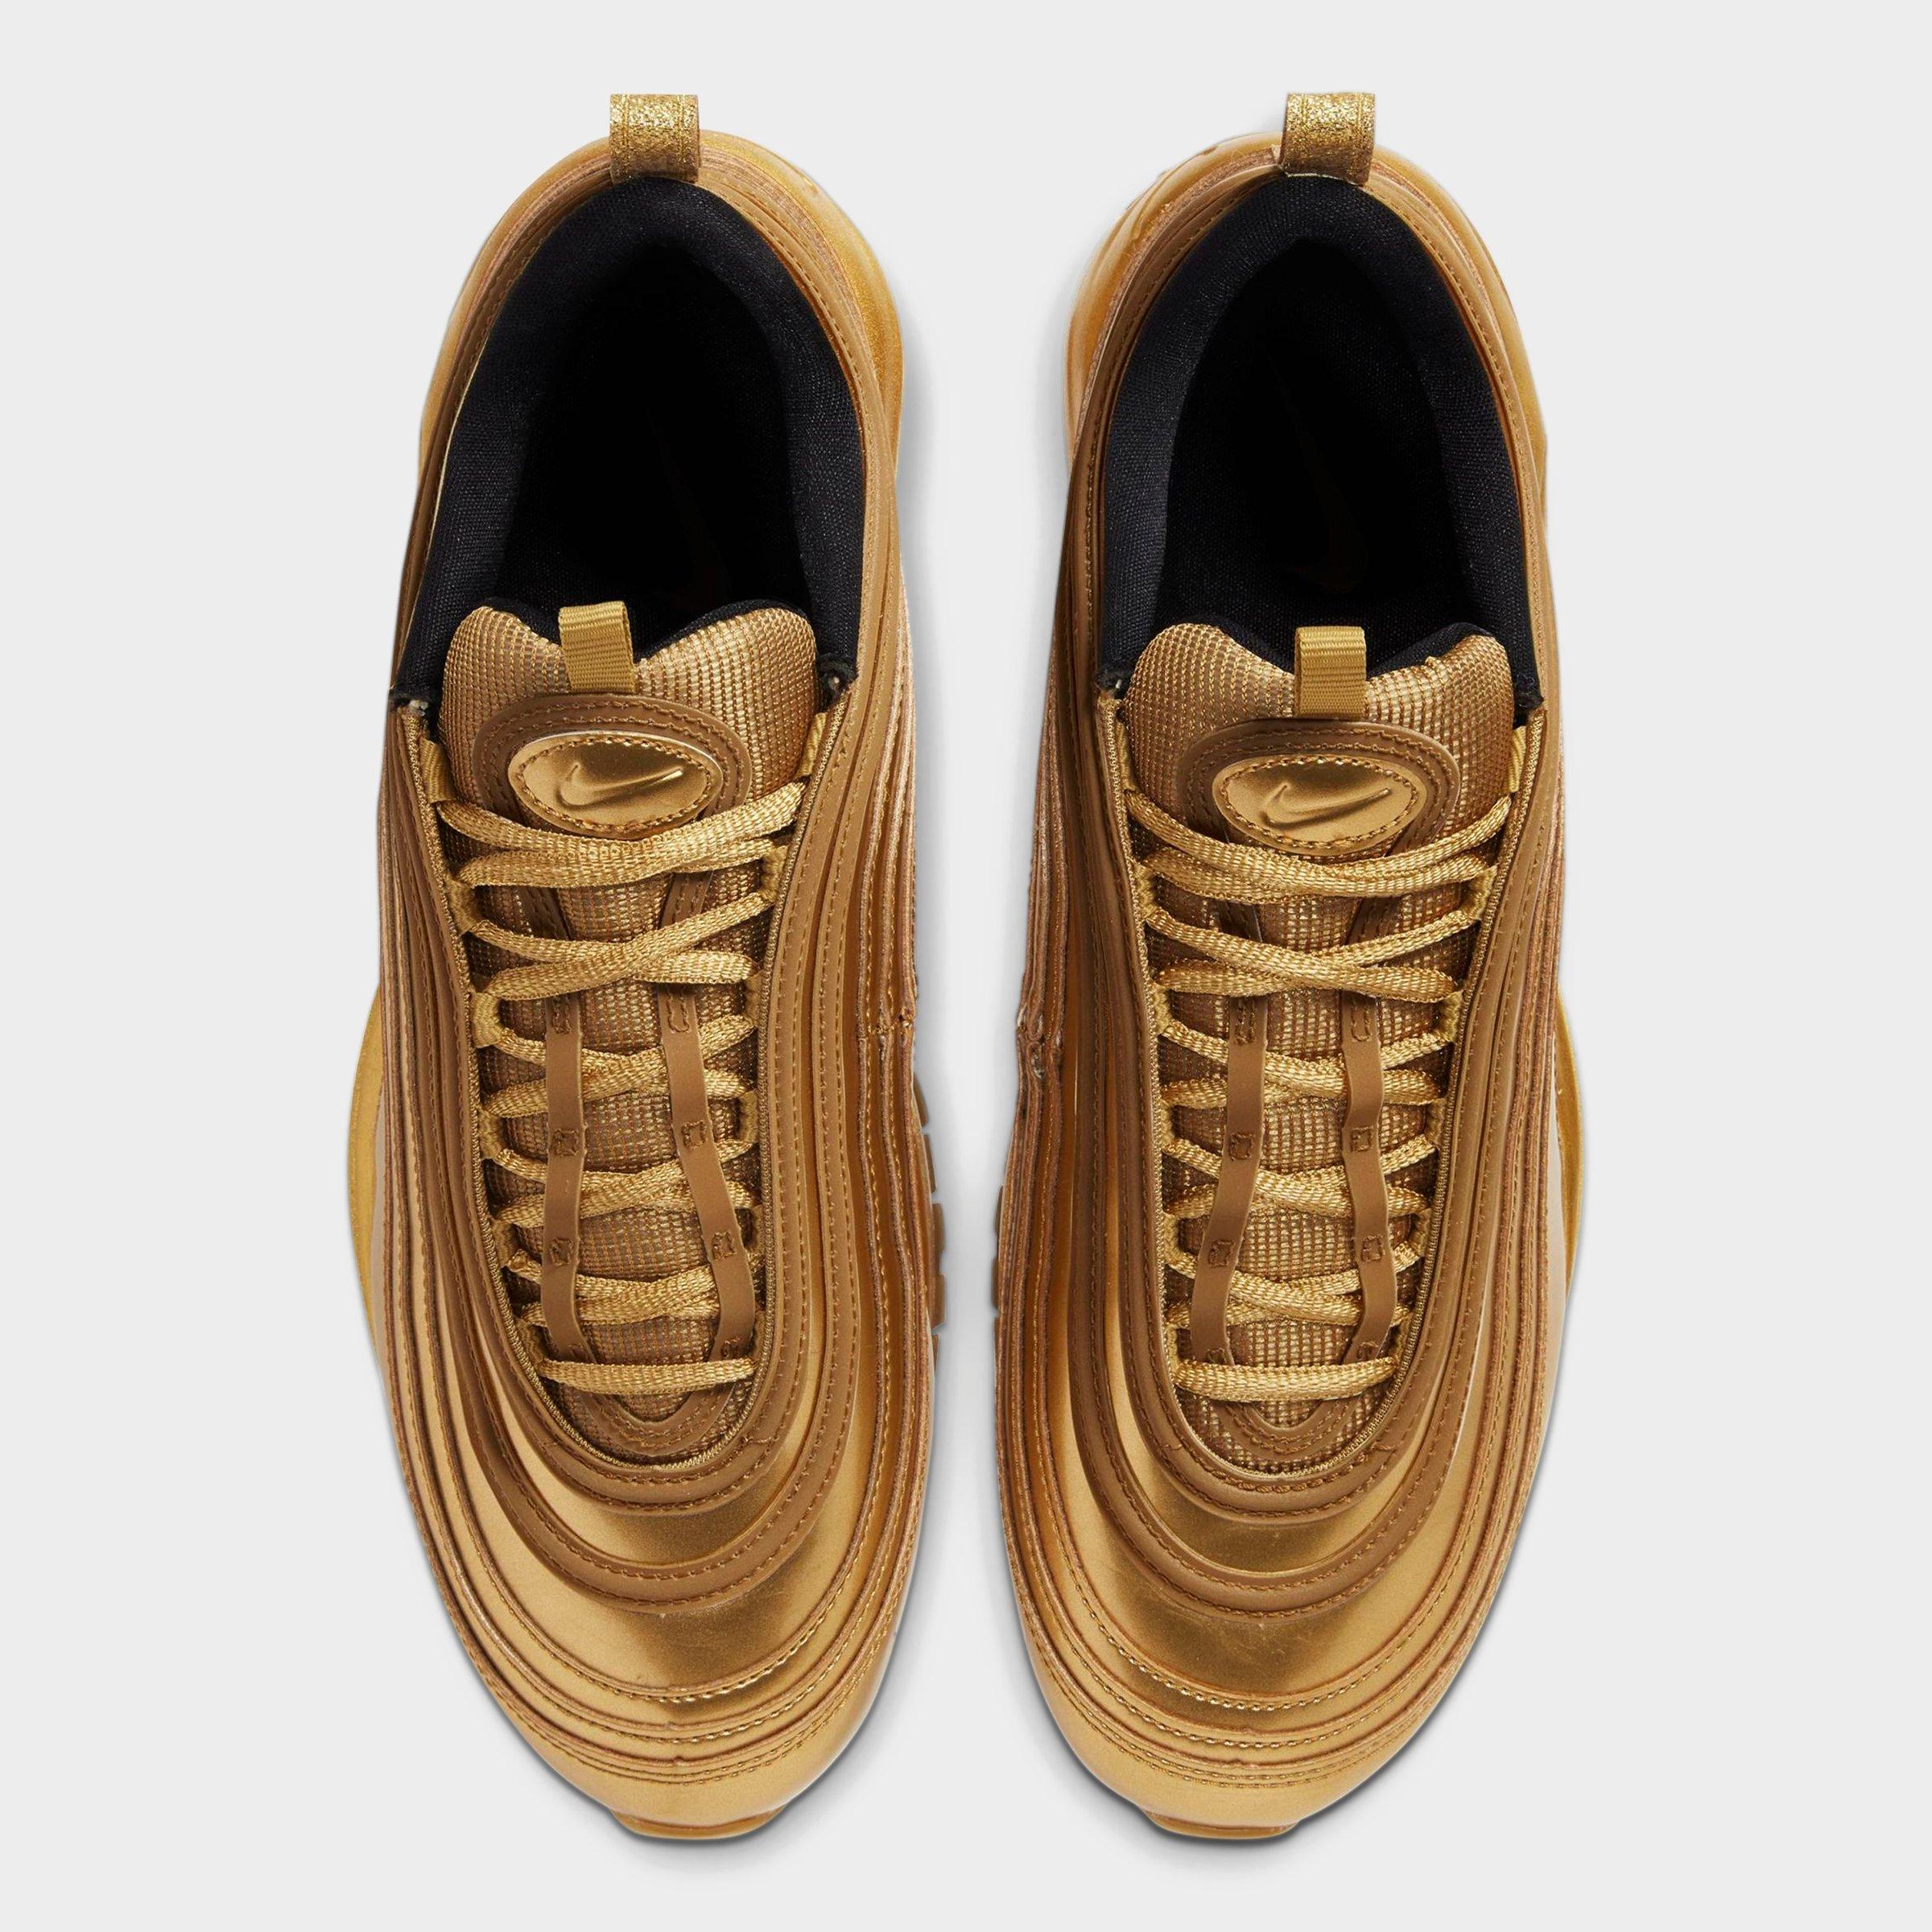 men's nike air max 97 gold medal casual shoes